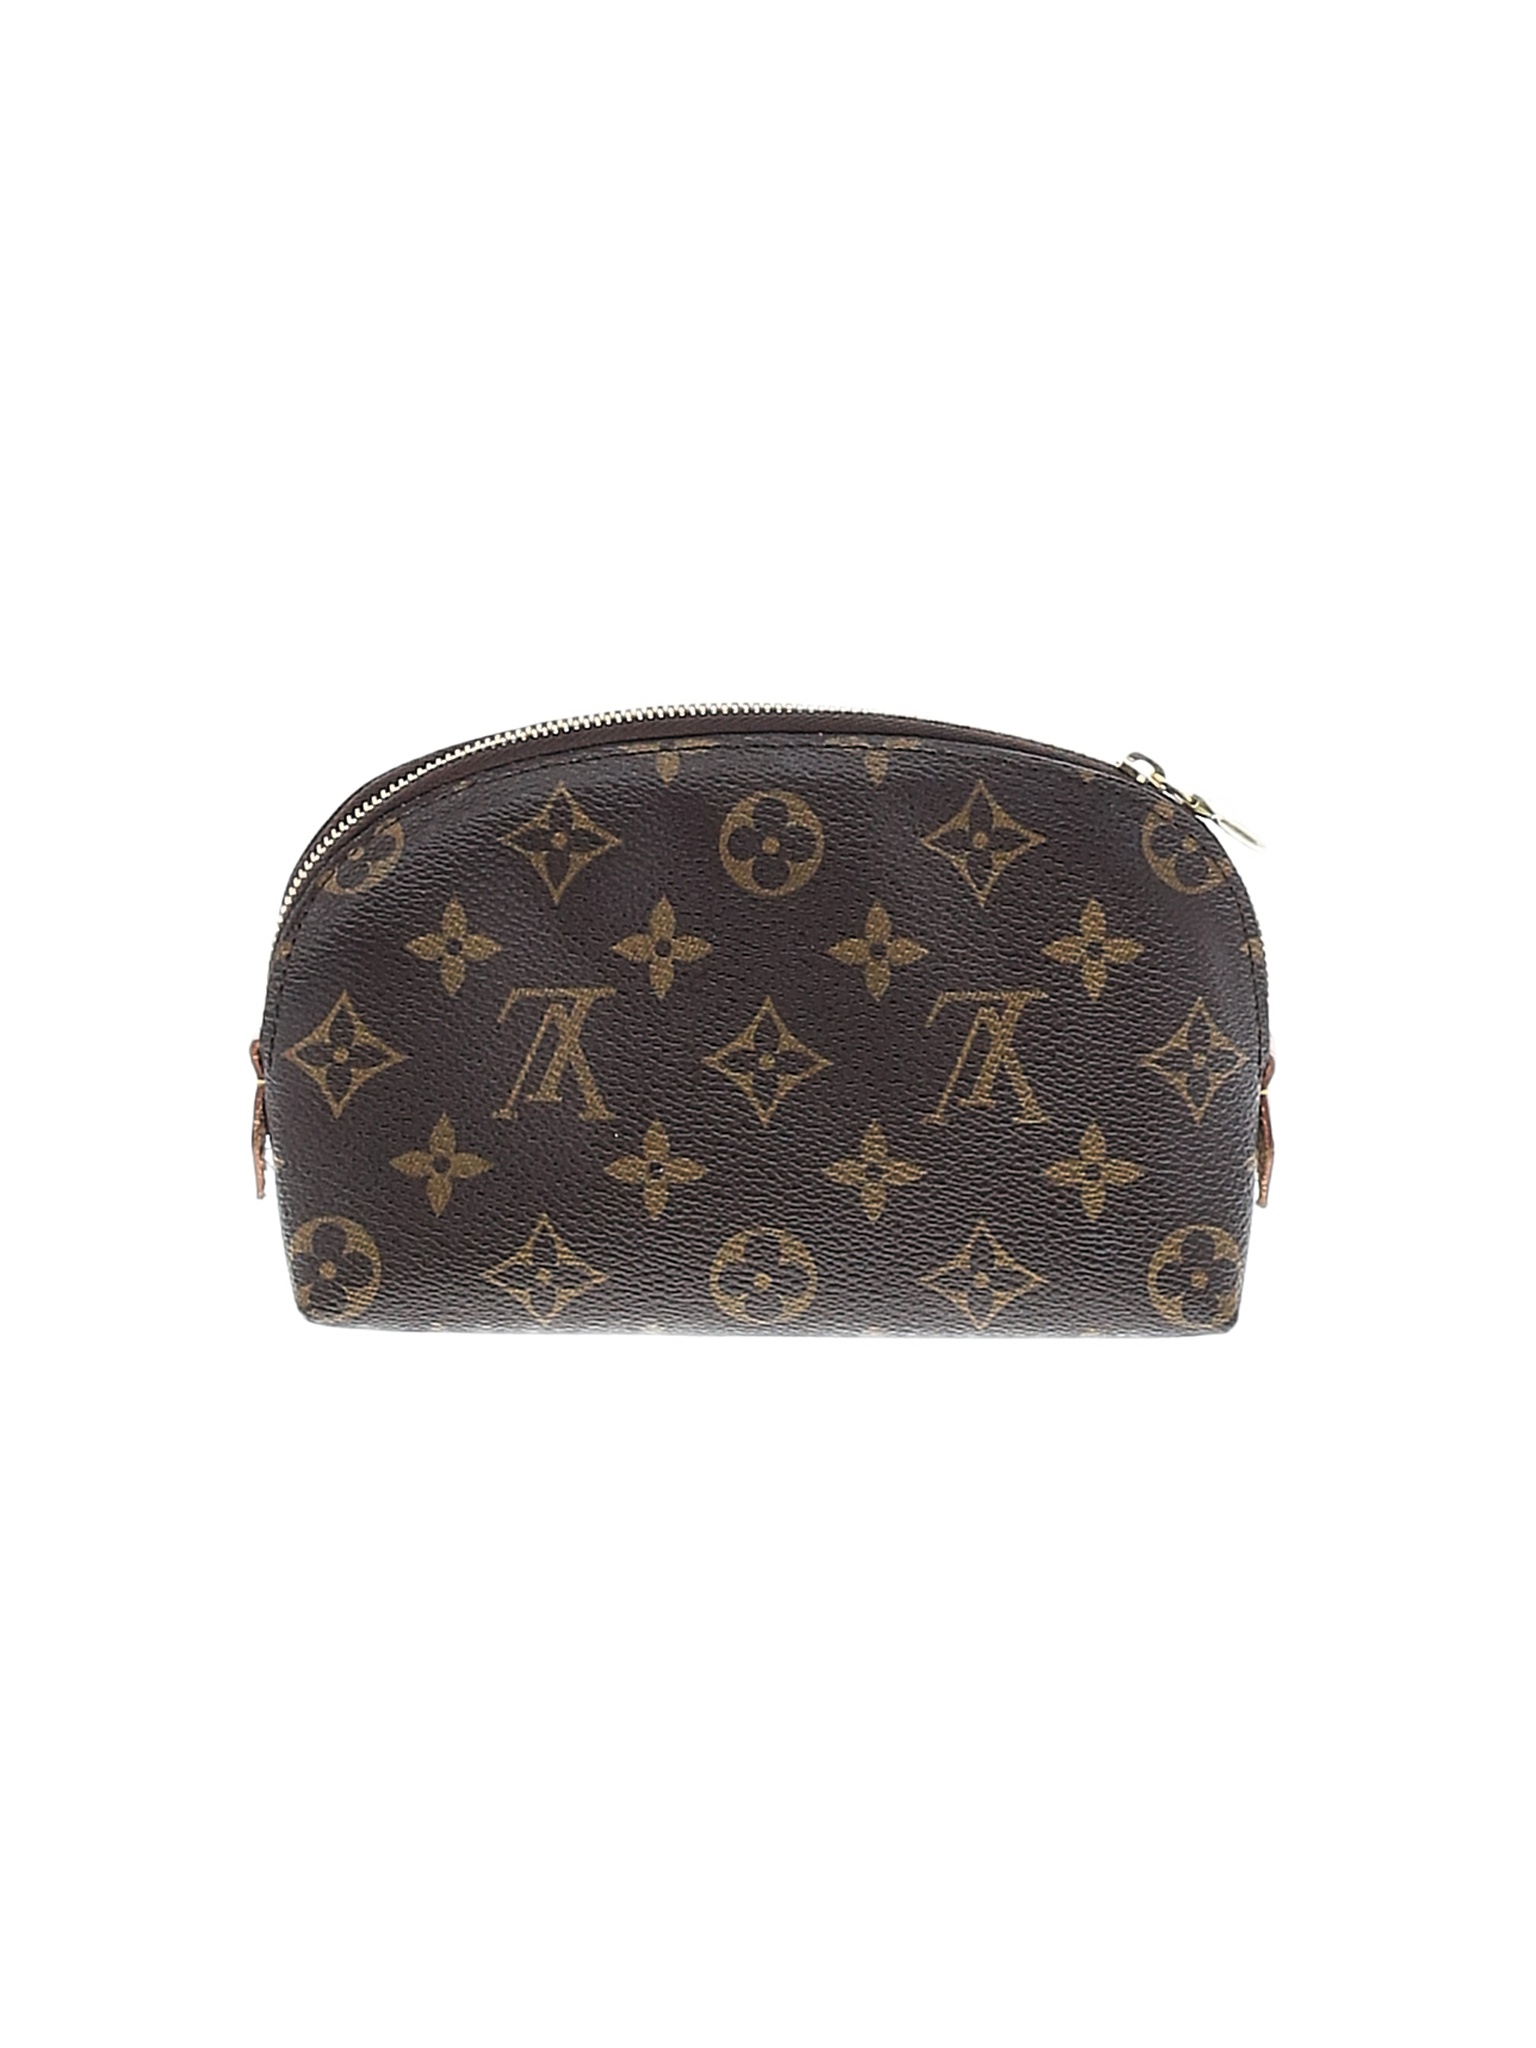 LV TRICOLOR COIN PURSE SMALL WALLET, Women's Fashion, Bags